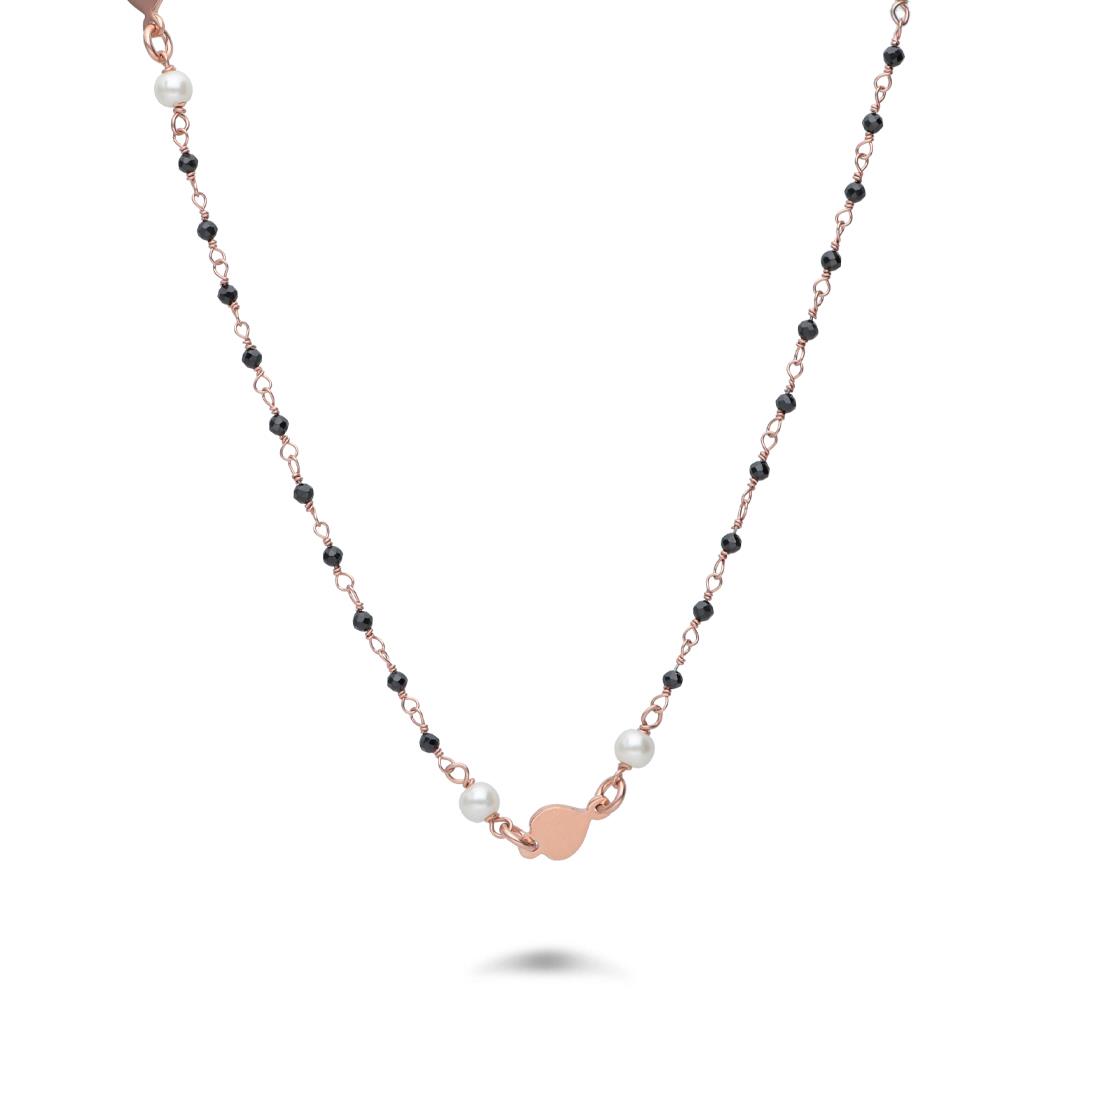 Rosary necklace with black and white pearls - ORO&CO 925